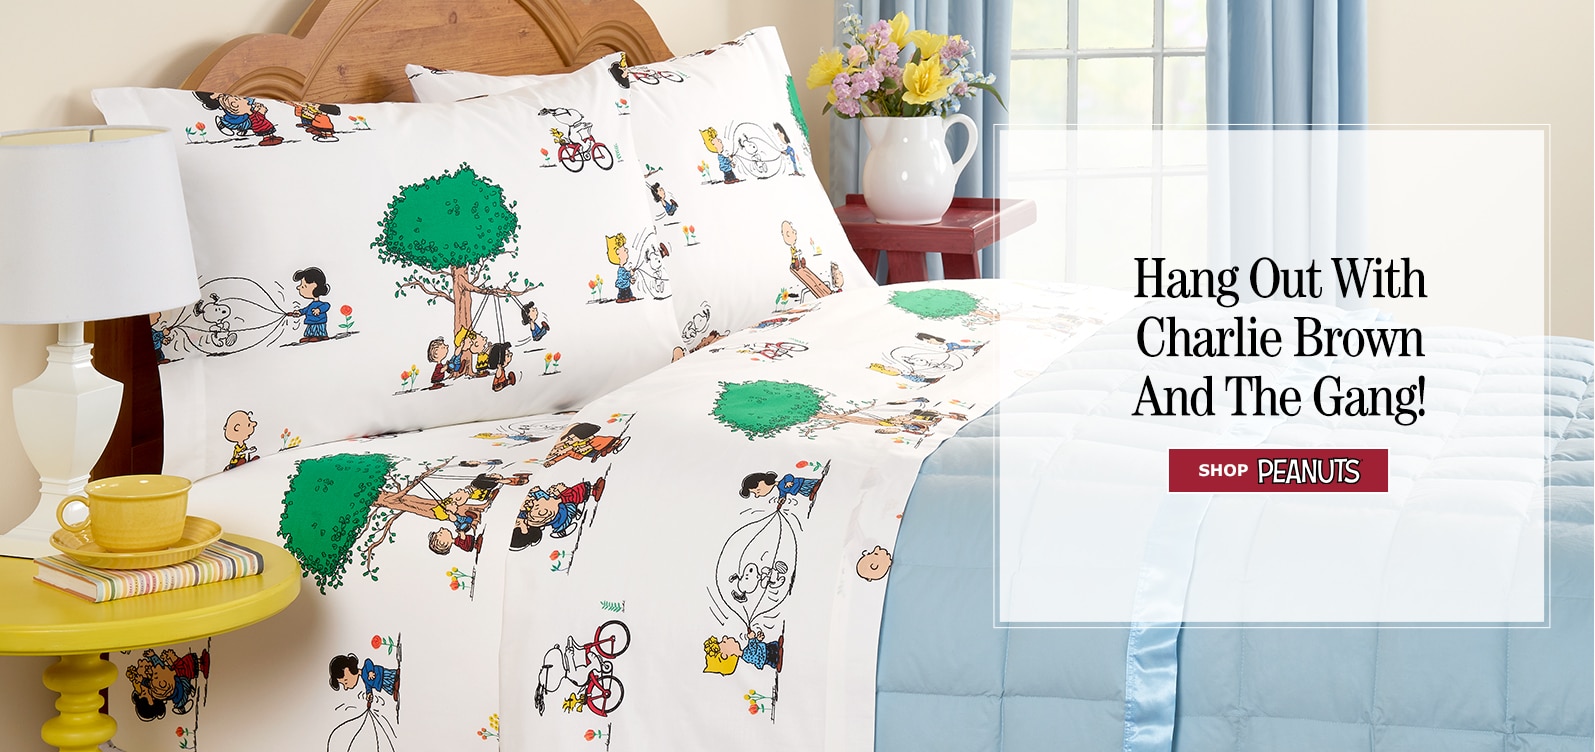 Hang Out With Charlie Brown and The Gang! Shop Peanuts ®